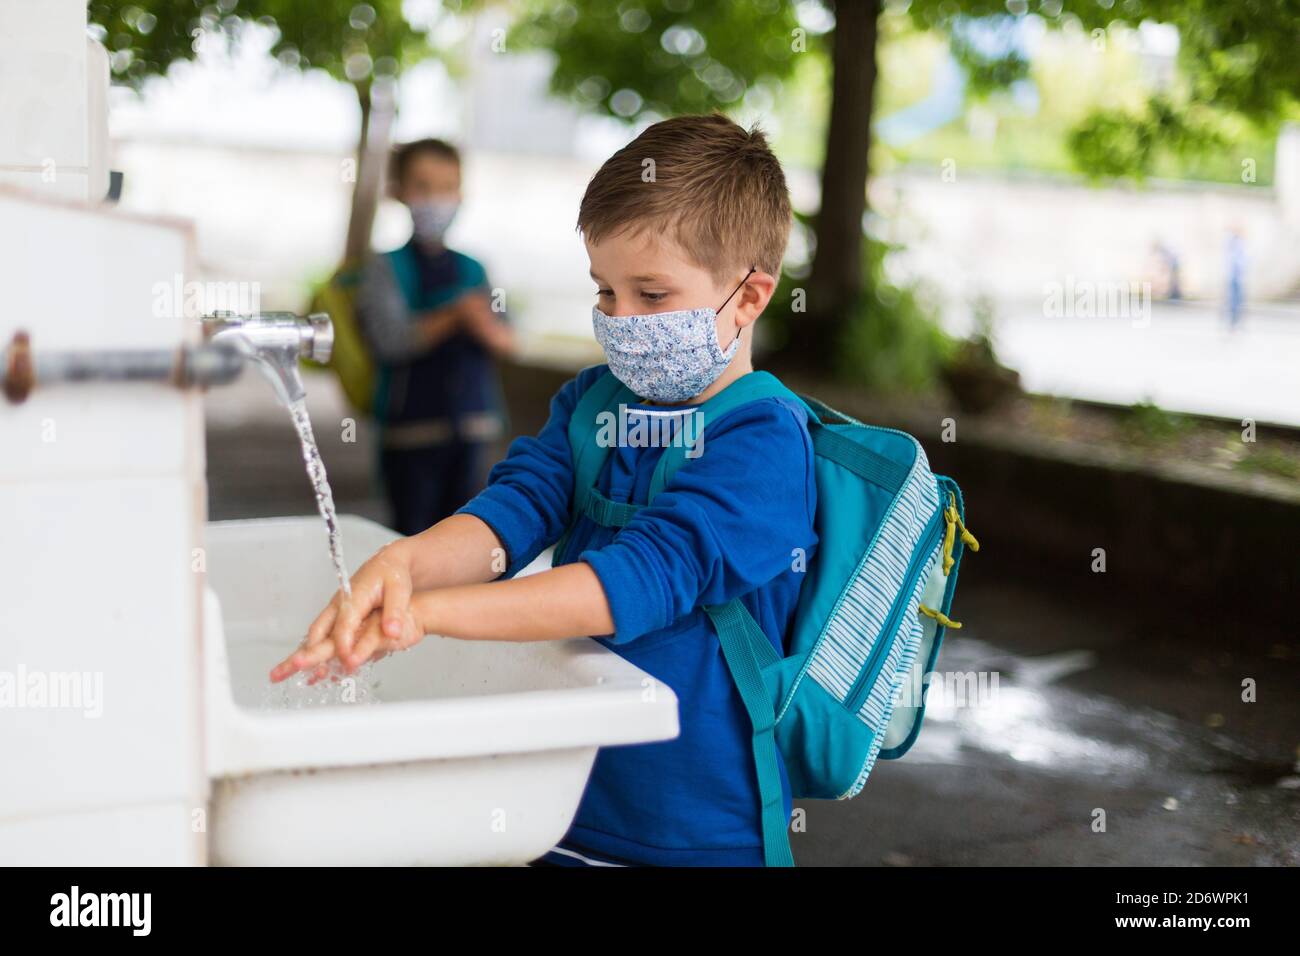 School after confinement during the Covid-19 pandemic, Dordogne, France. Stock Photo